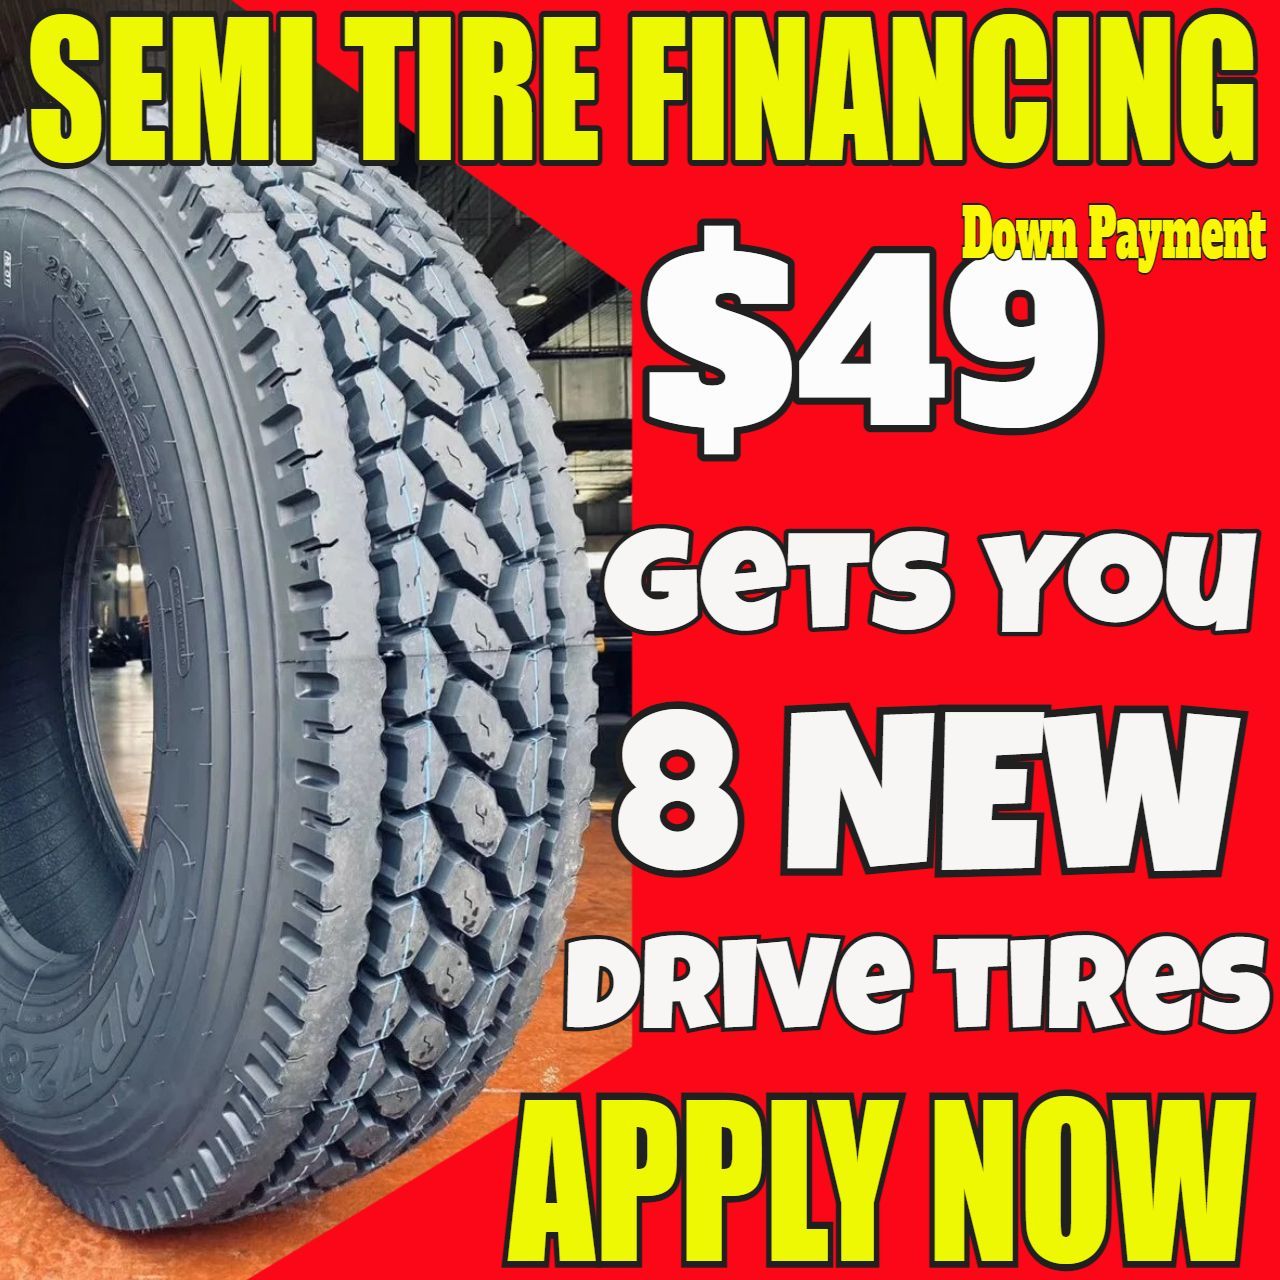 Commercial semi-truck tires Denver, CO. 18-wheeler Heavy-duty Big-Rig trucking tires at Denver, CO. Cheap tractor-trailer auto vehicle prices in Denver, CO